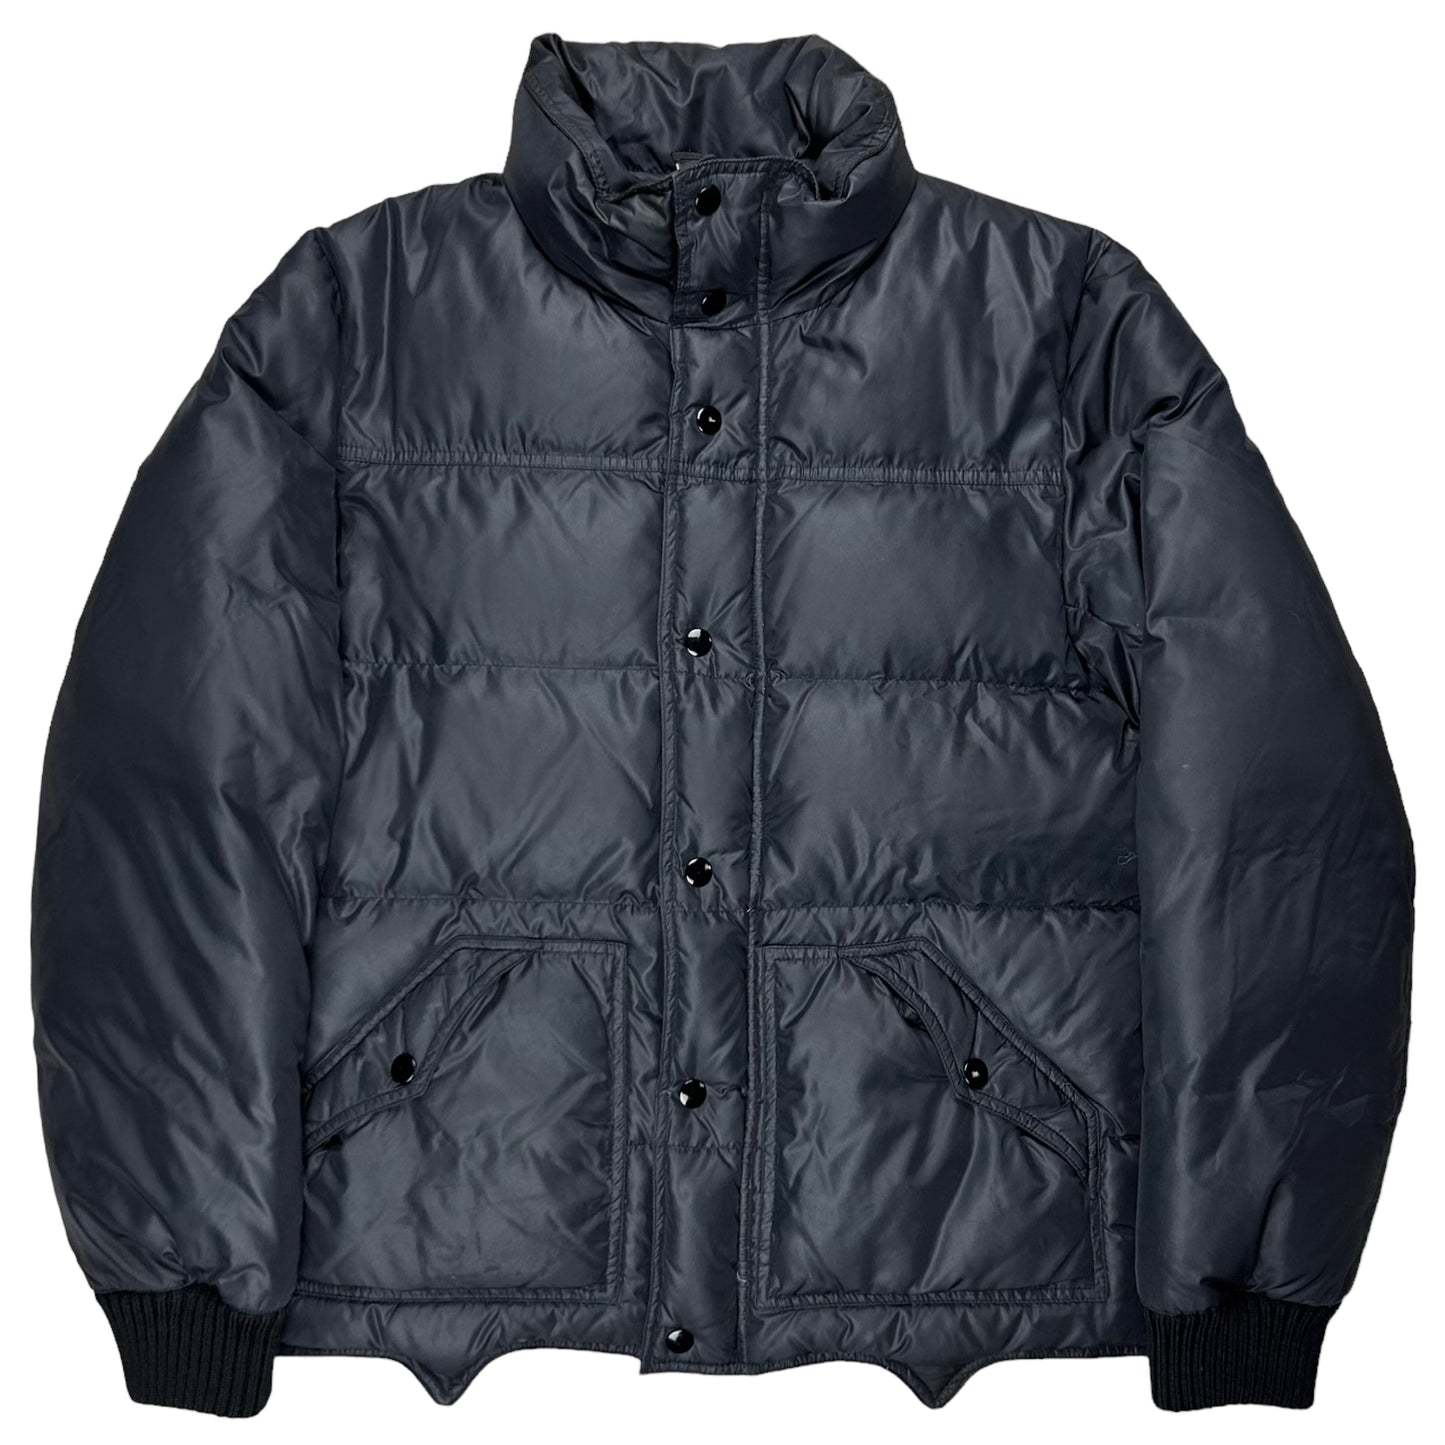 Dior Homme Boxy Goose Down Puffer Jacket - AW06